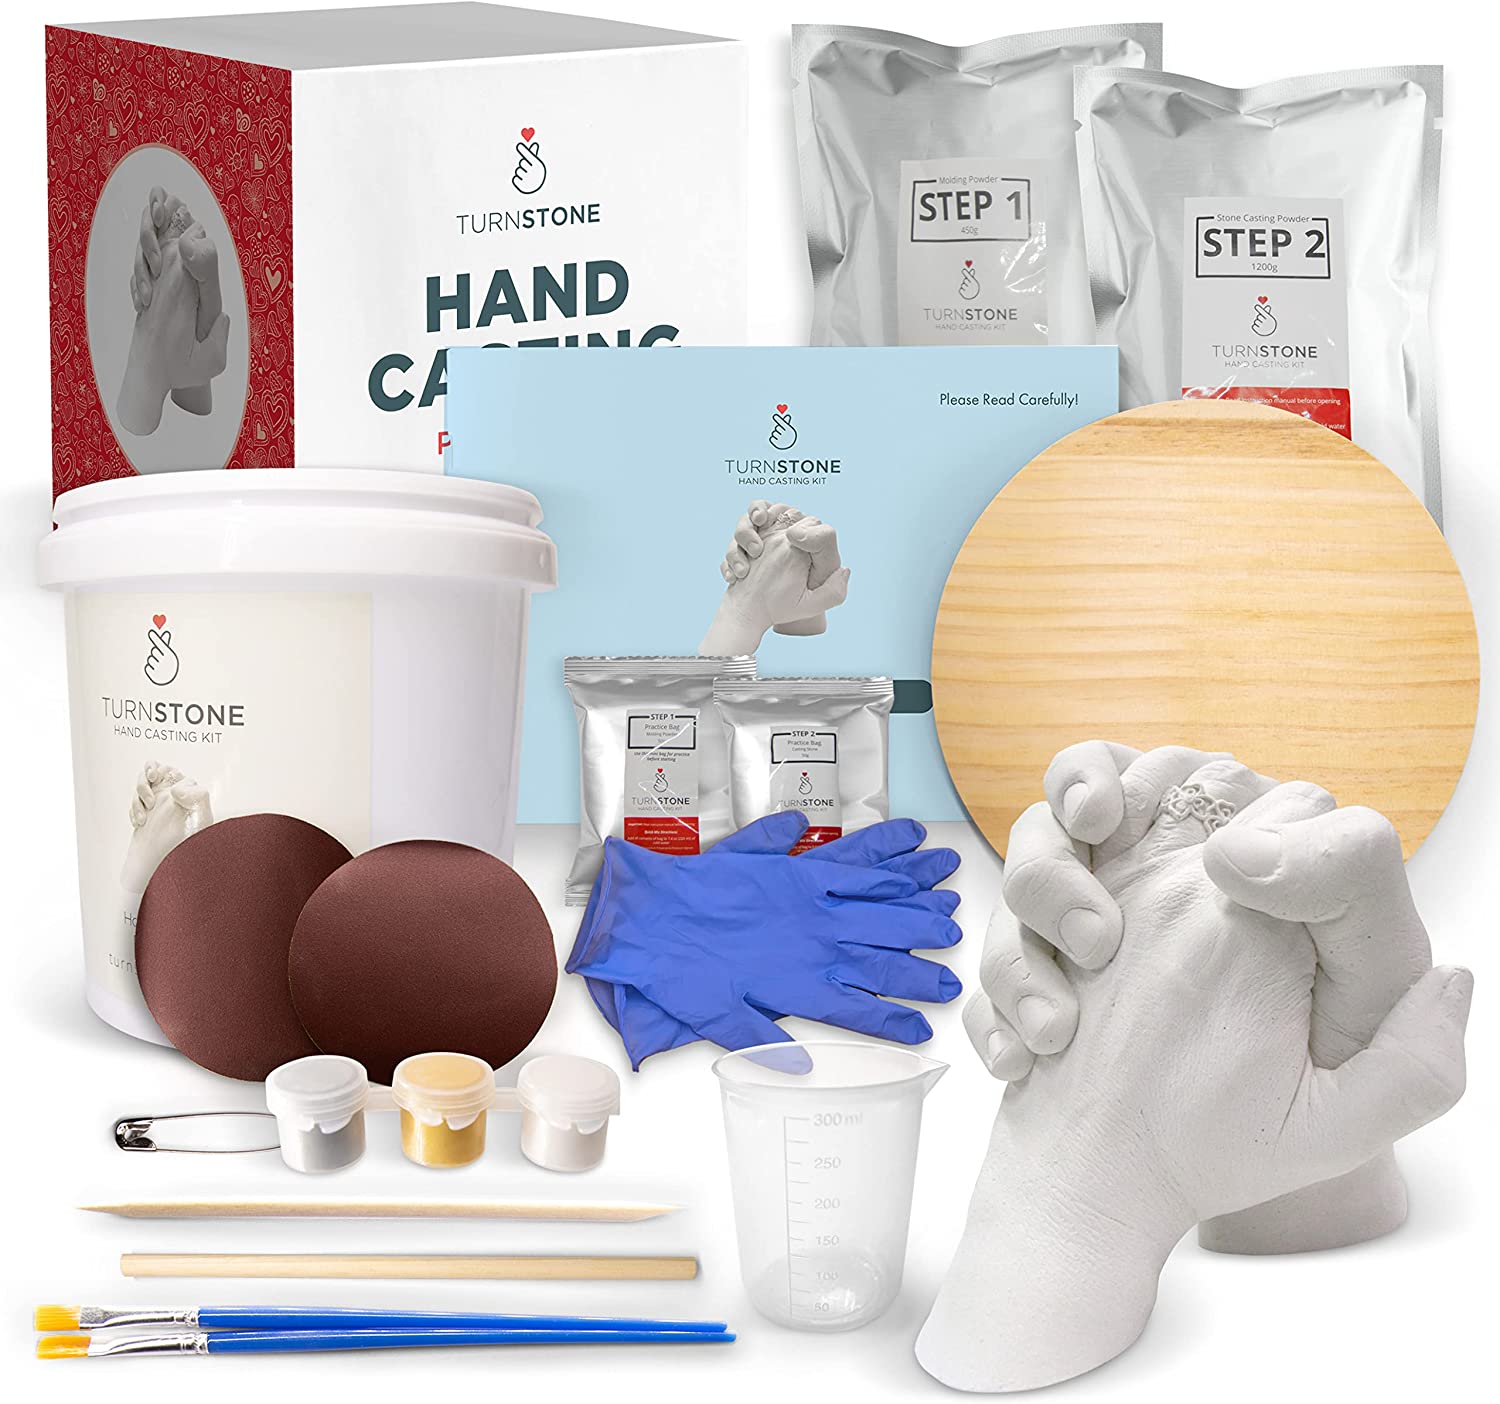 Hand Casting Kit - Complete Hand Molding with Plaster, Bucket